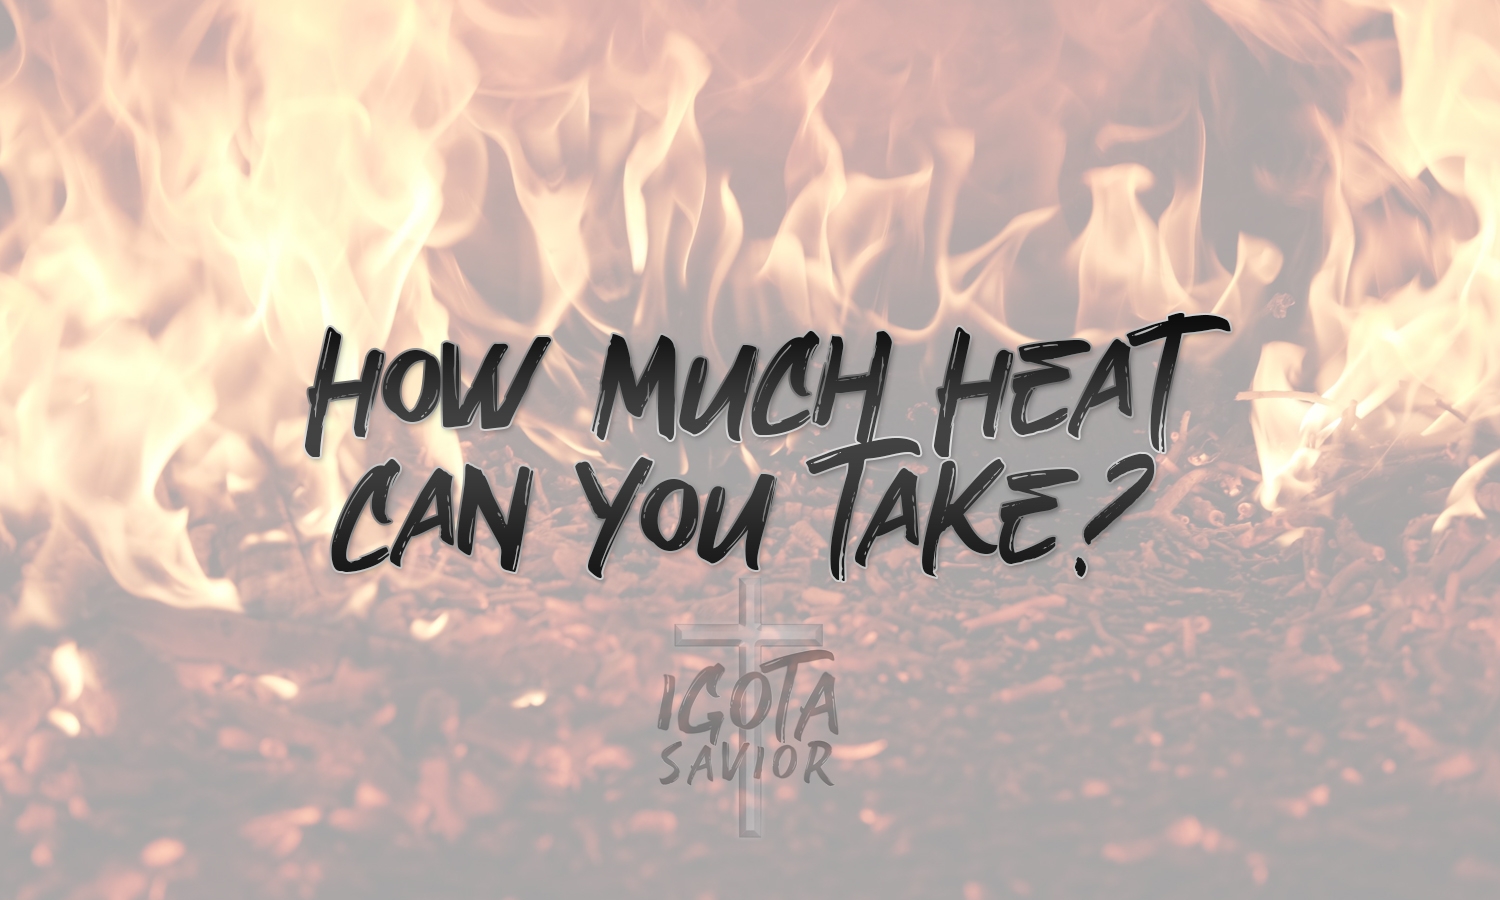 How Much Heat Can You Take?